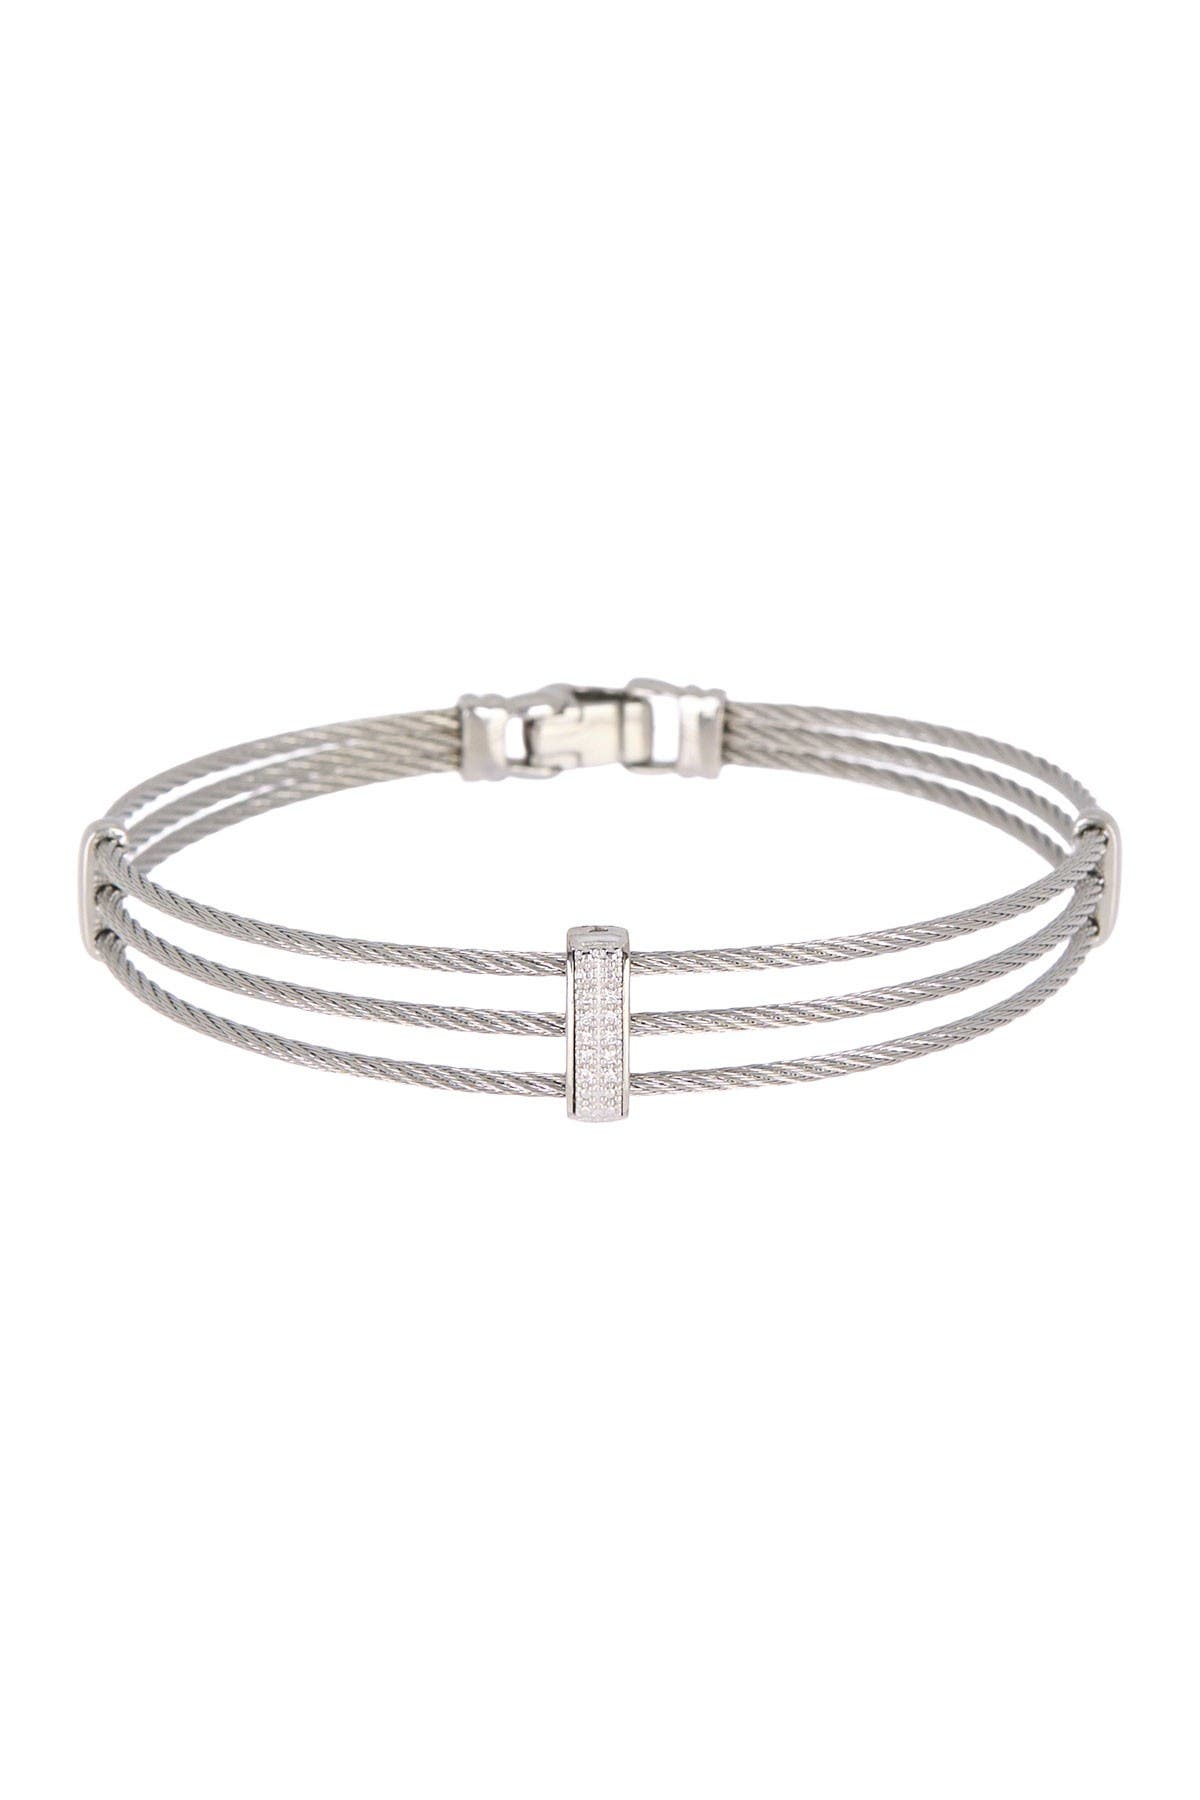 Alor 18k White Gold Plated Stainless Steel Pave Stone Triple Row Wire Bangle Bracelet In Grey